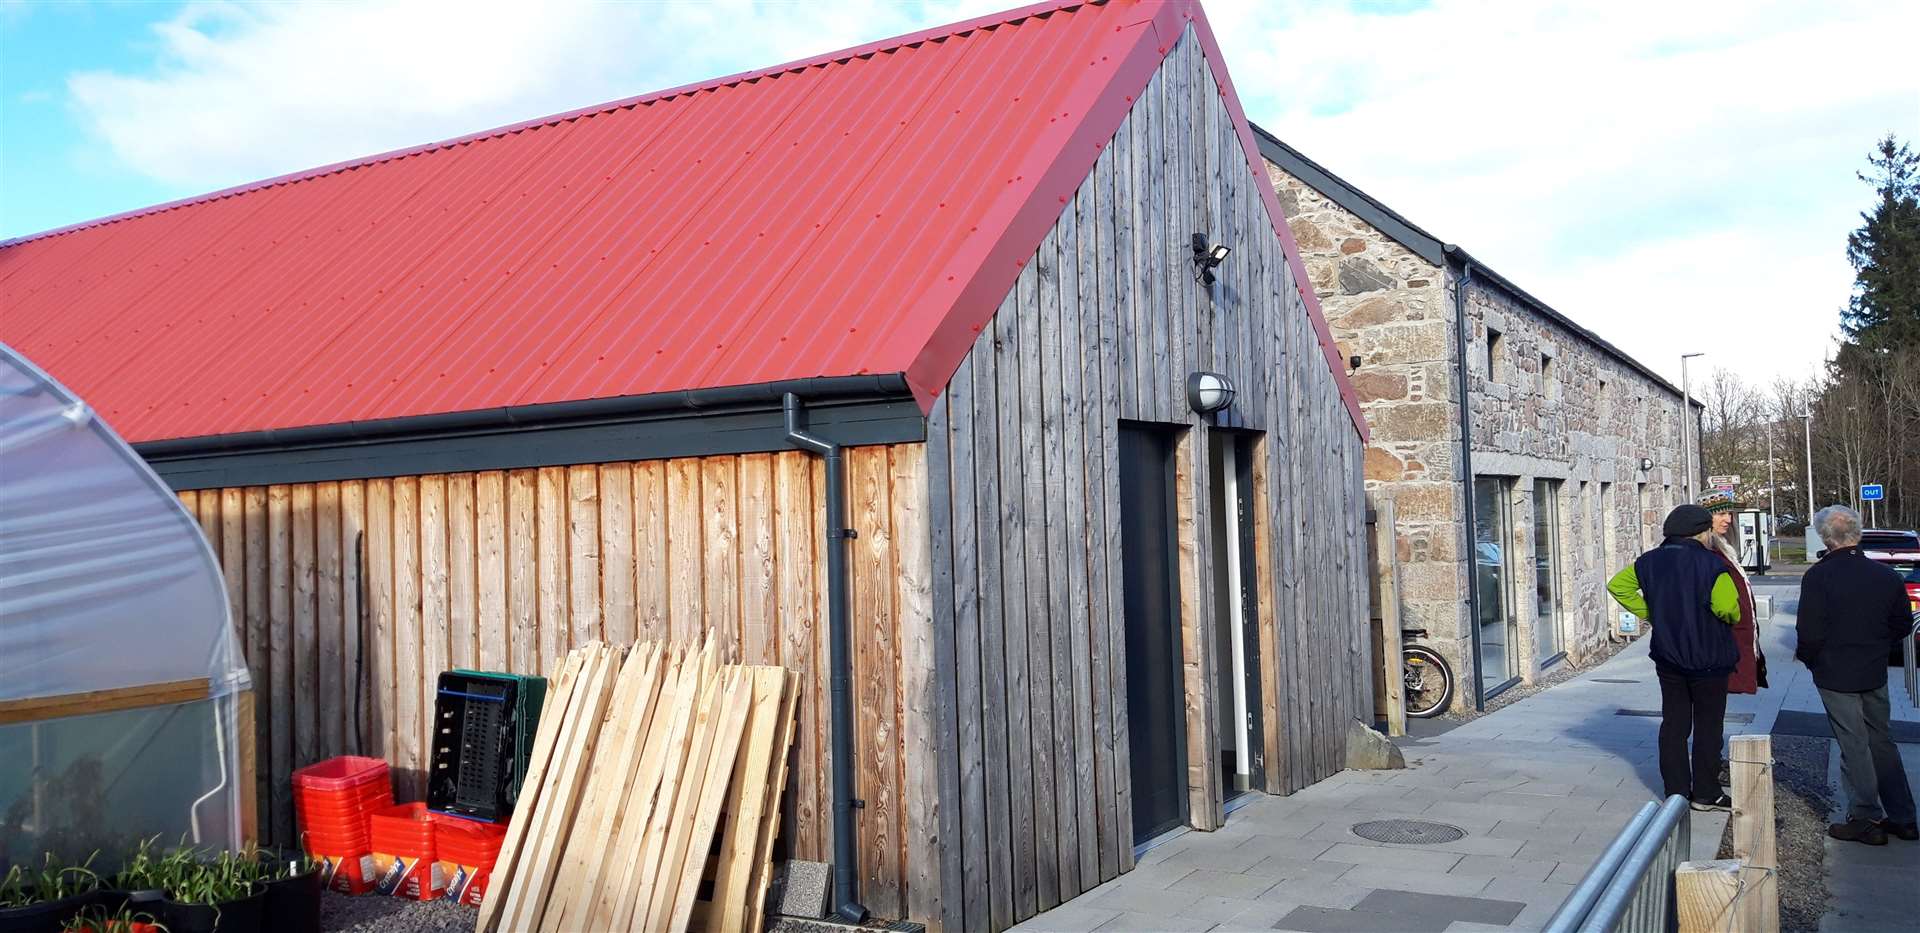 The spacious new larder is housed in a renovated storage shed sited next to KoSDT headquarters at Ardgay.